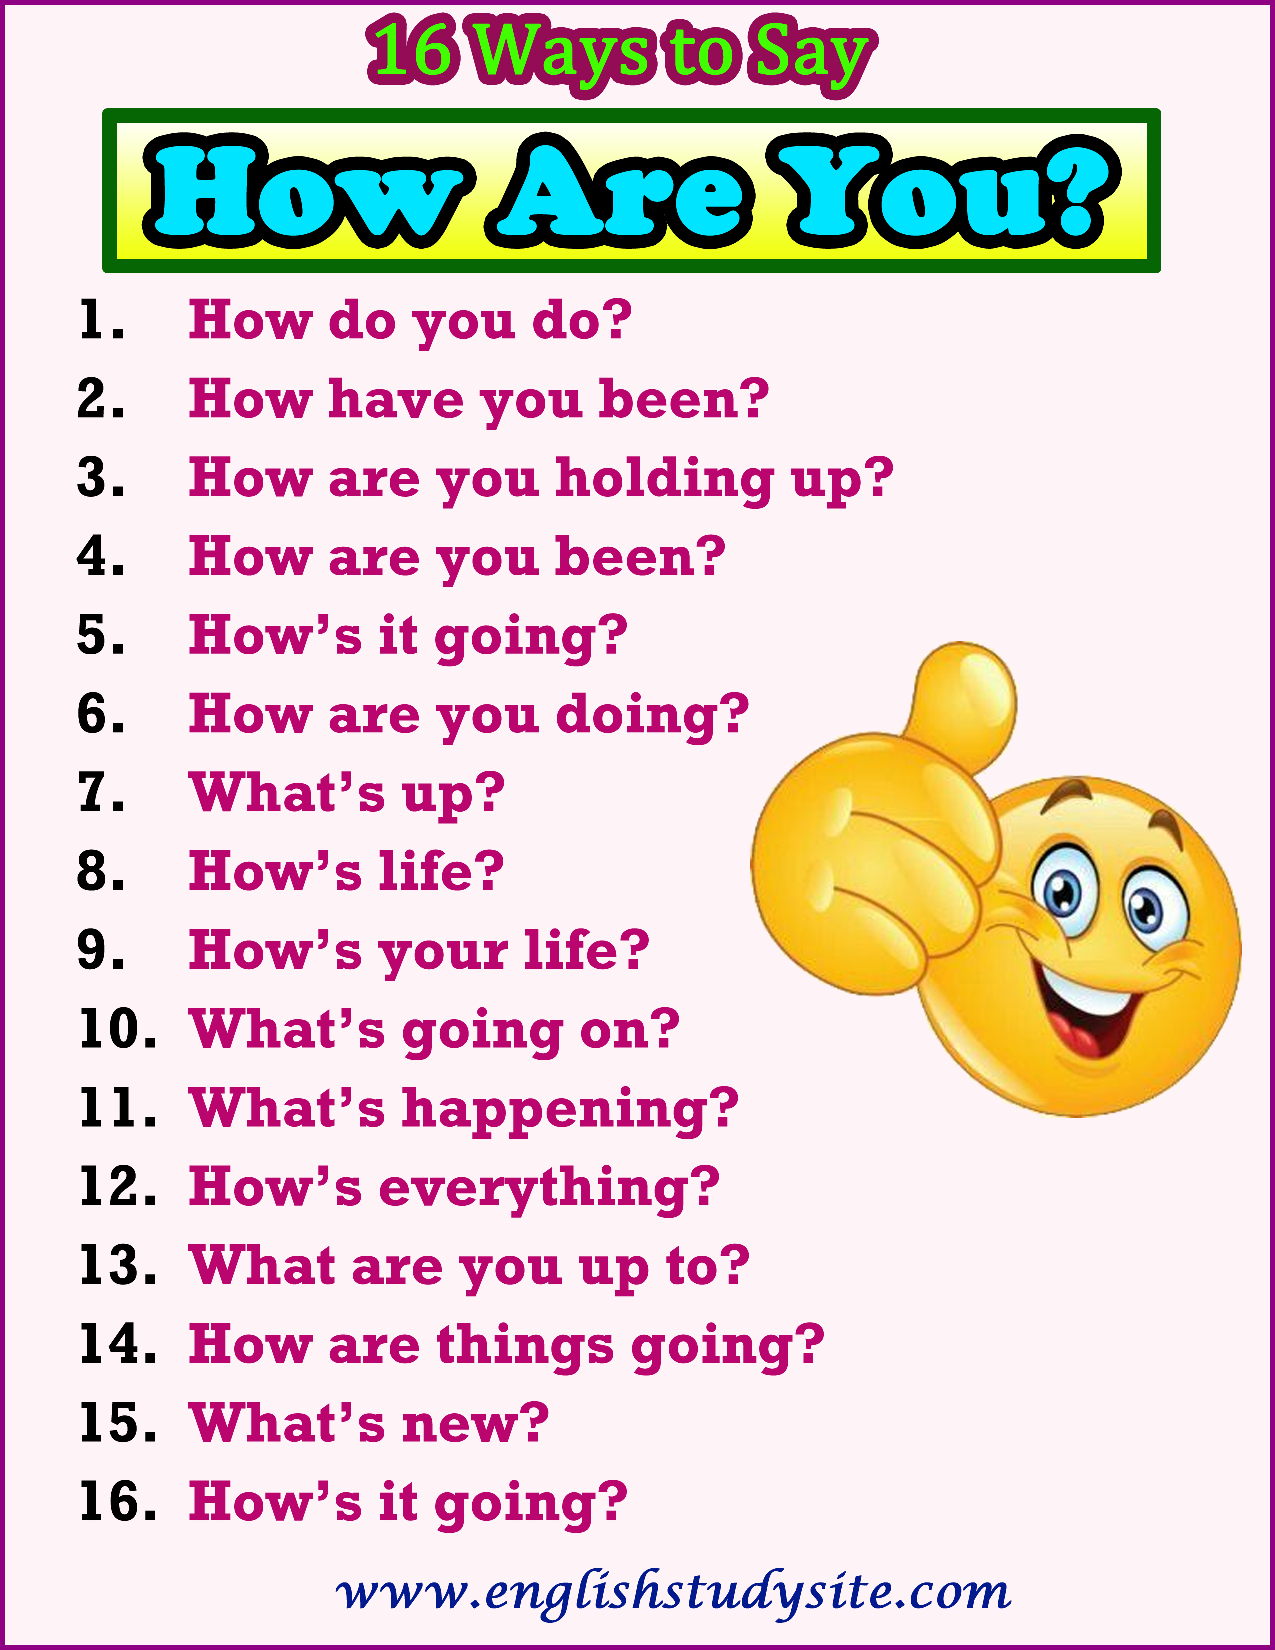 9 Ways to Ask “How Are You?” with Examples